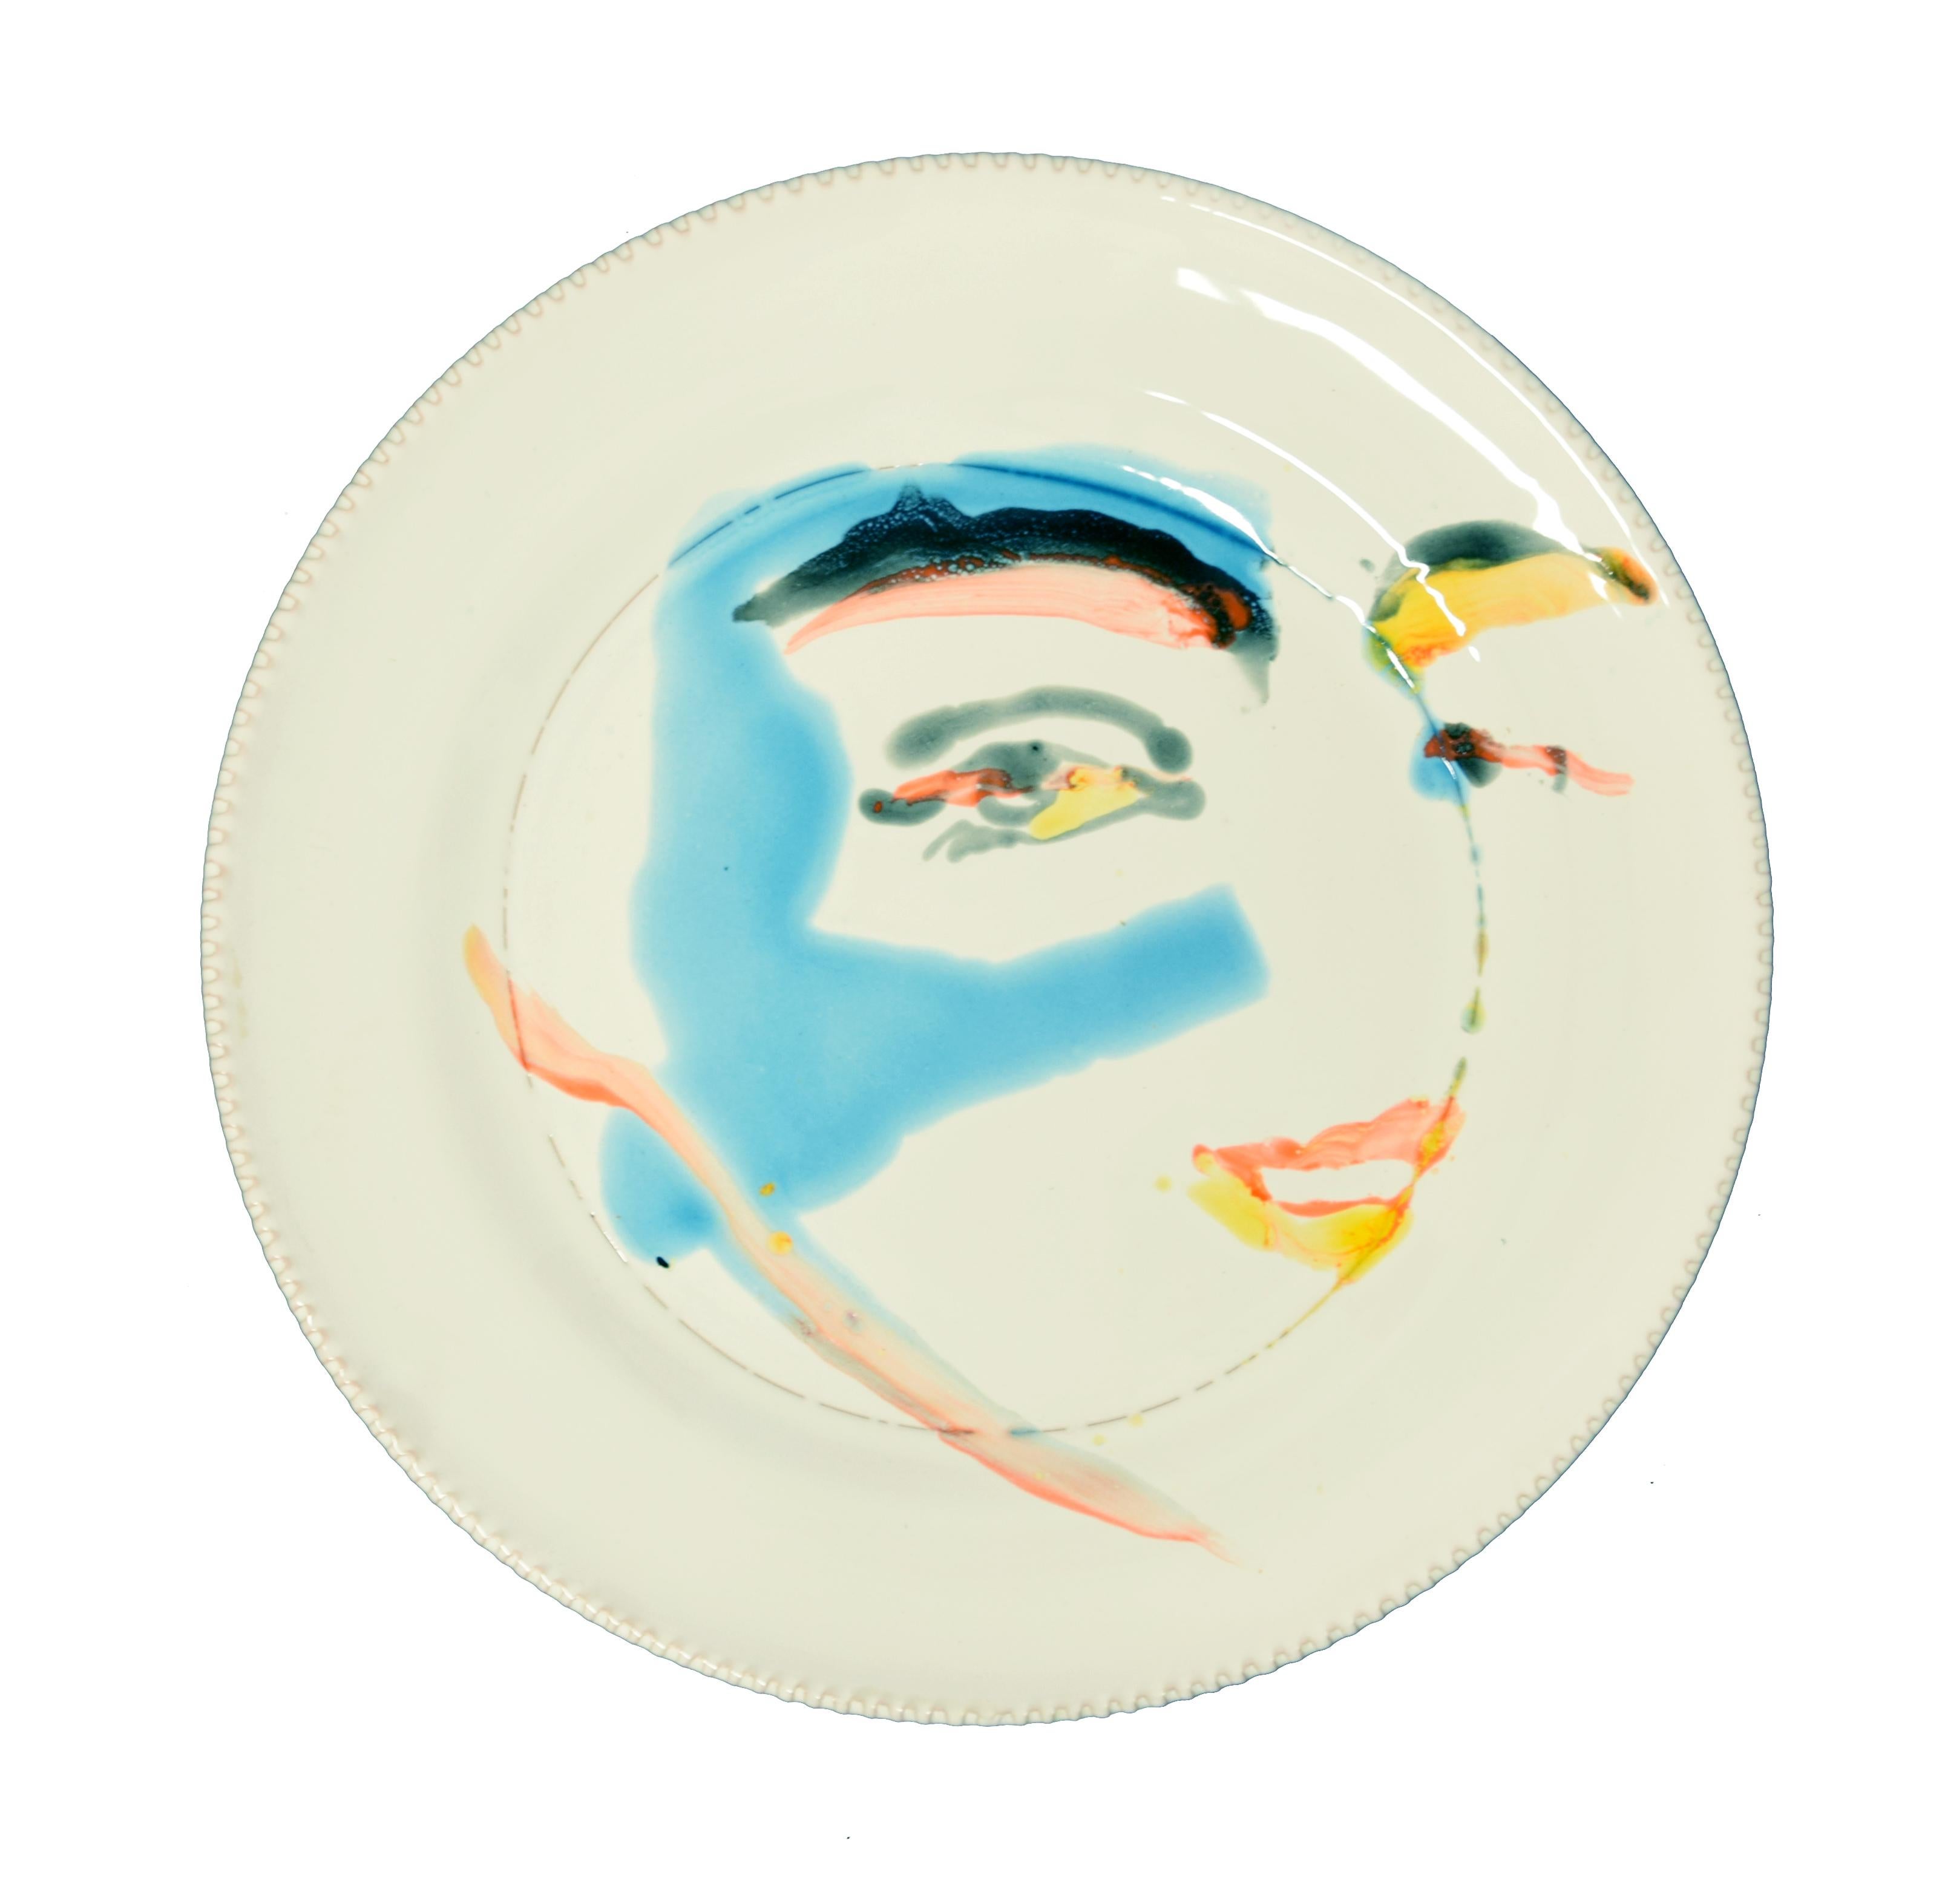 Eyes is a beautiful hand-made flat ceramic dish realized by the Russian artist, Anastasia Kurakina in 2019. 

On the back at the center the blue stamp 